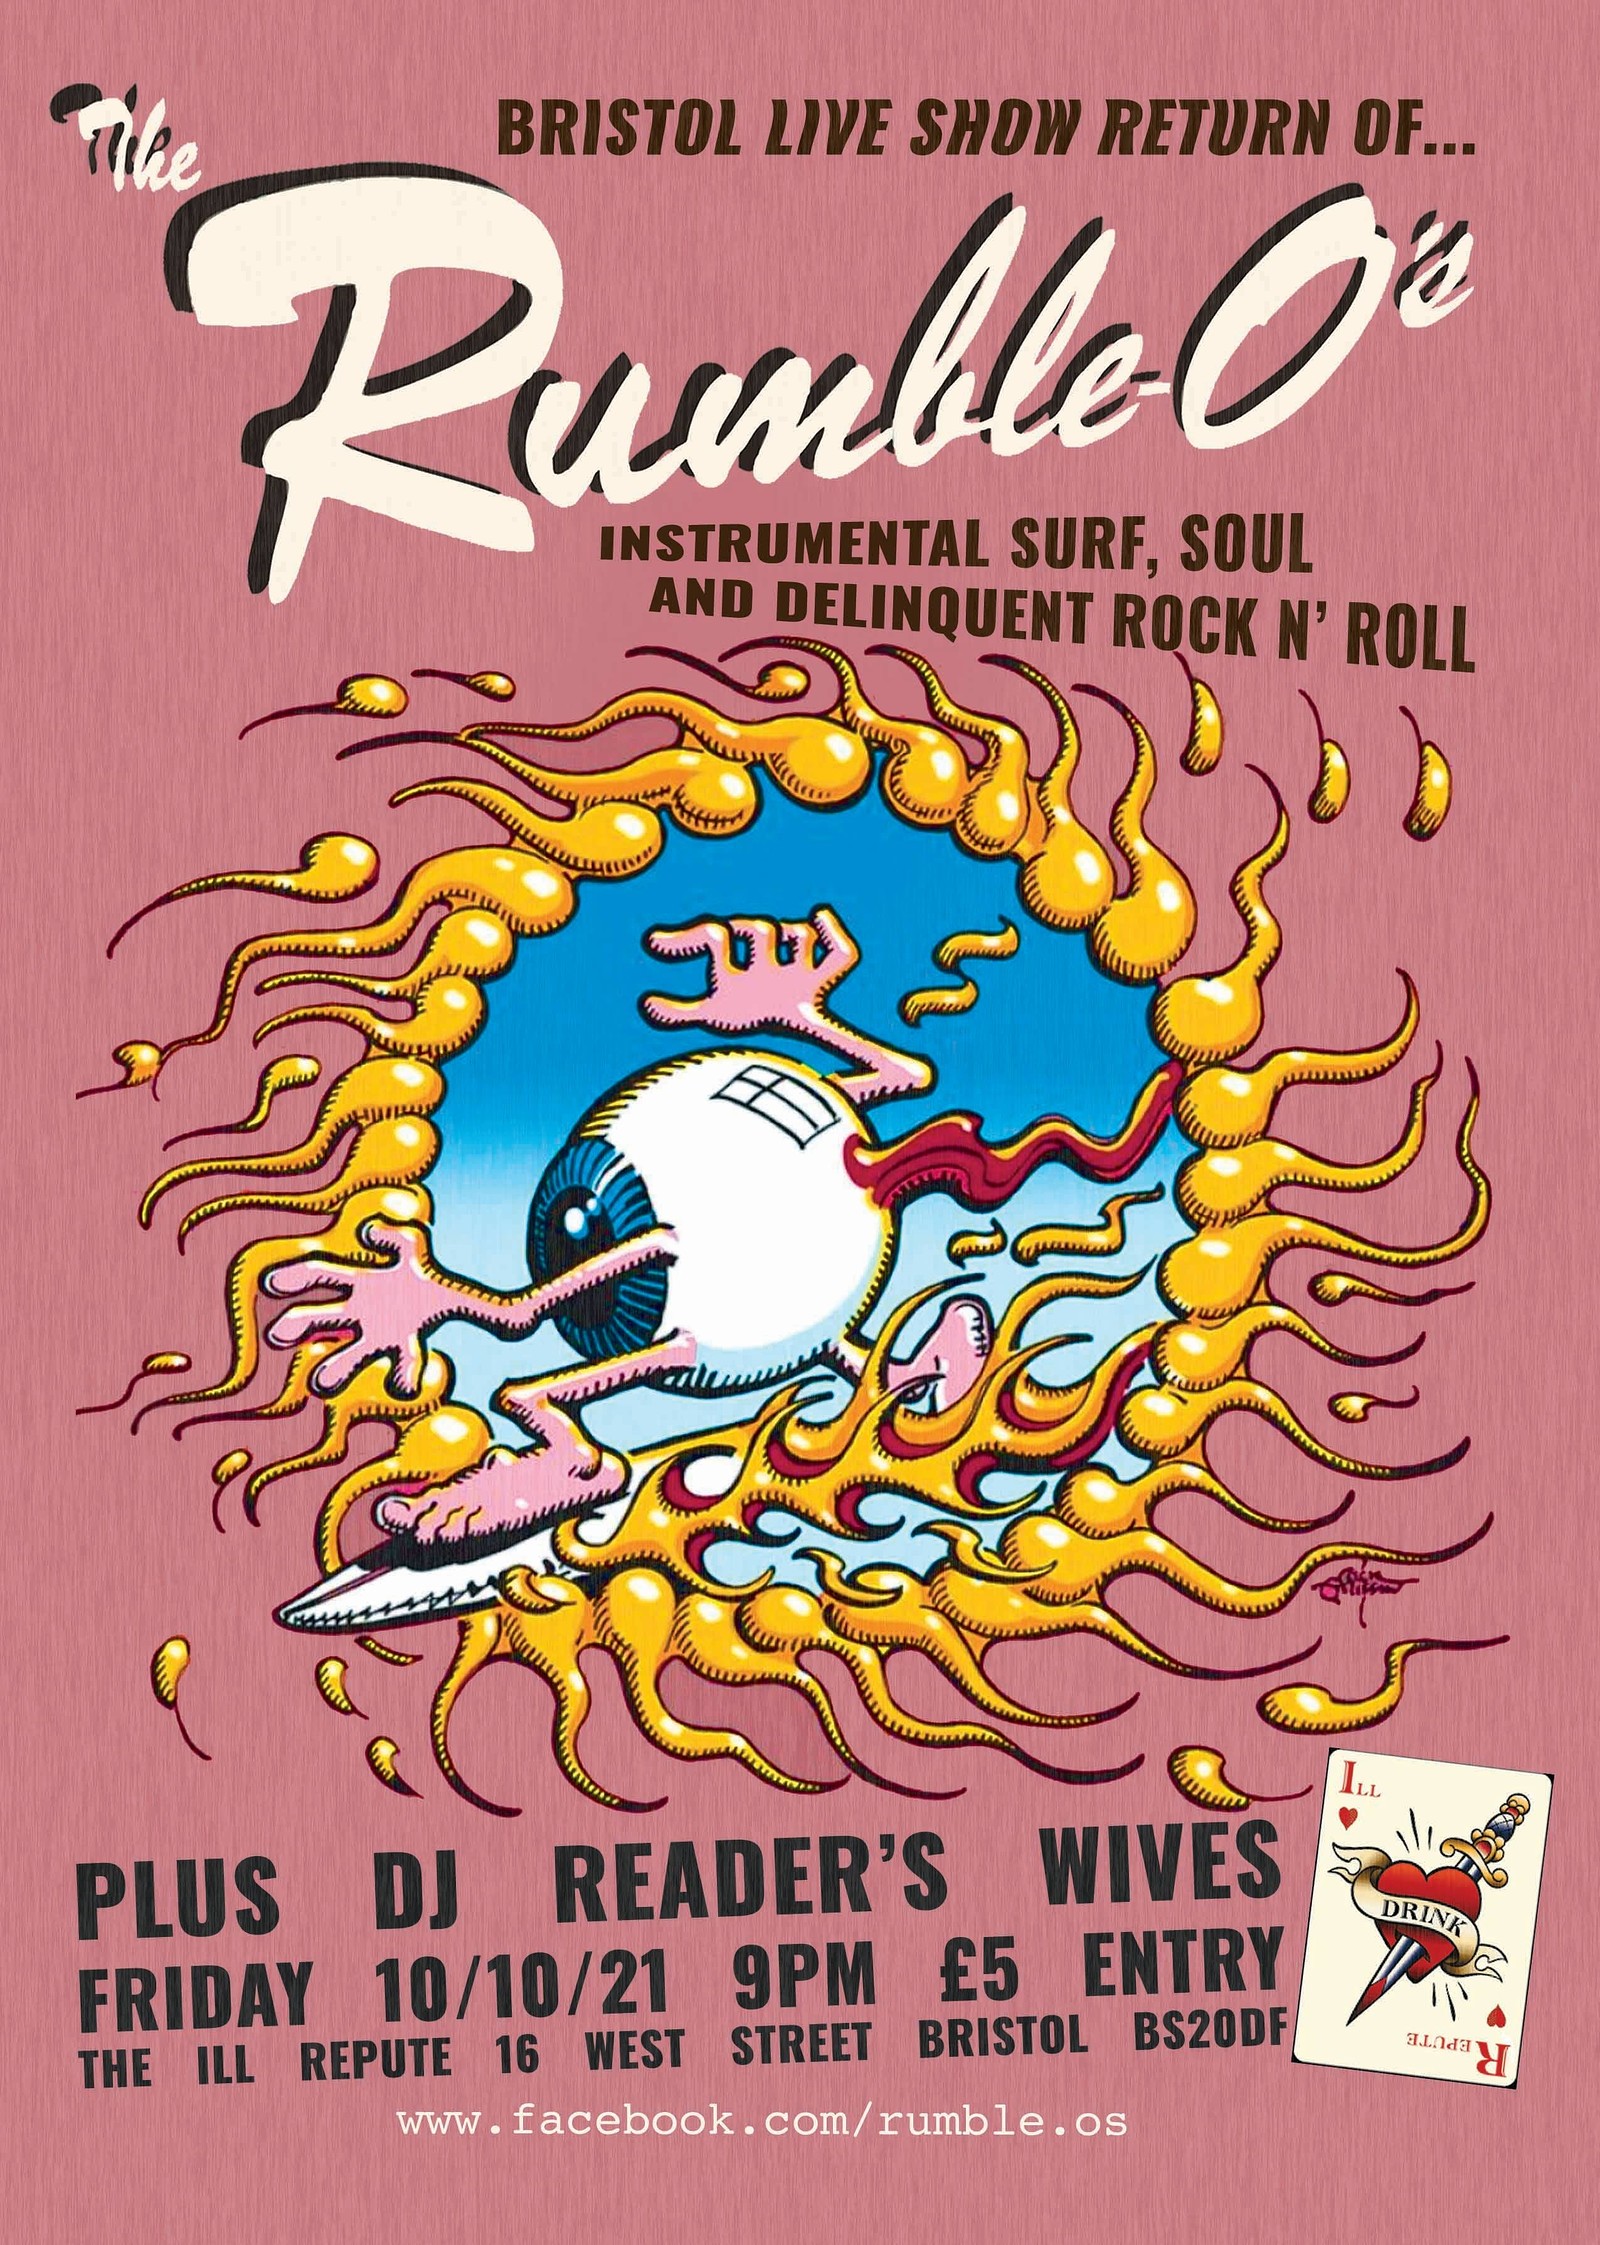 The Rumble-O's at The ILL REPUTE